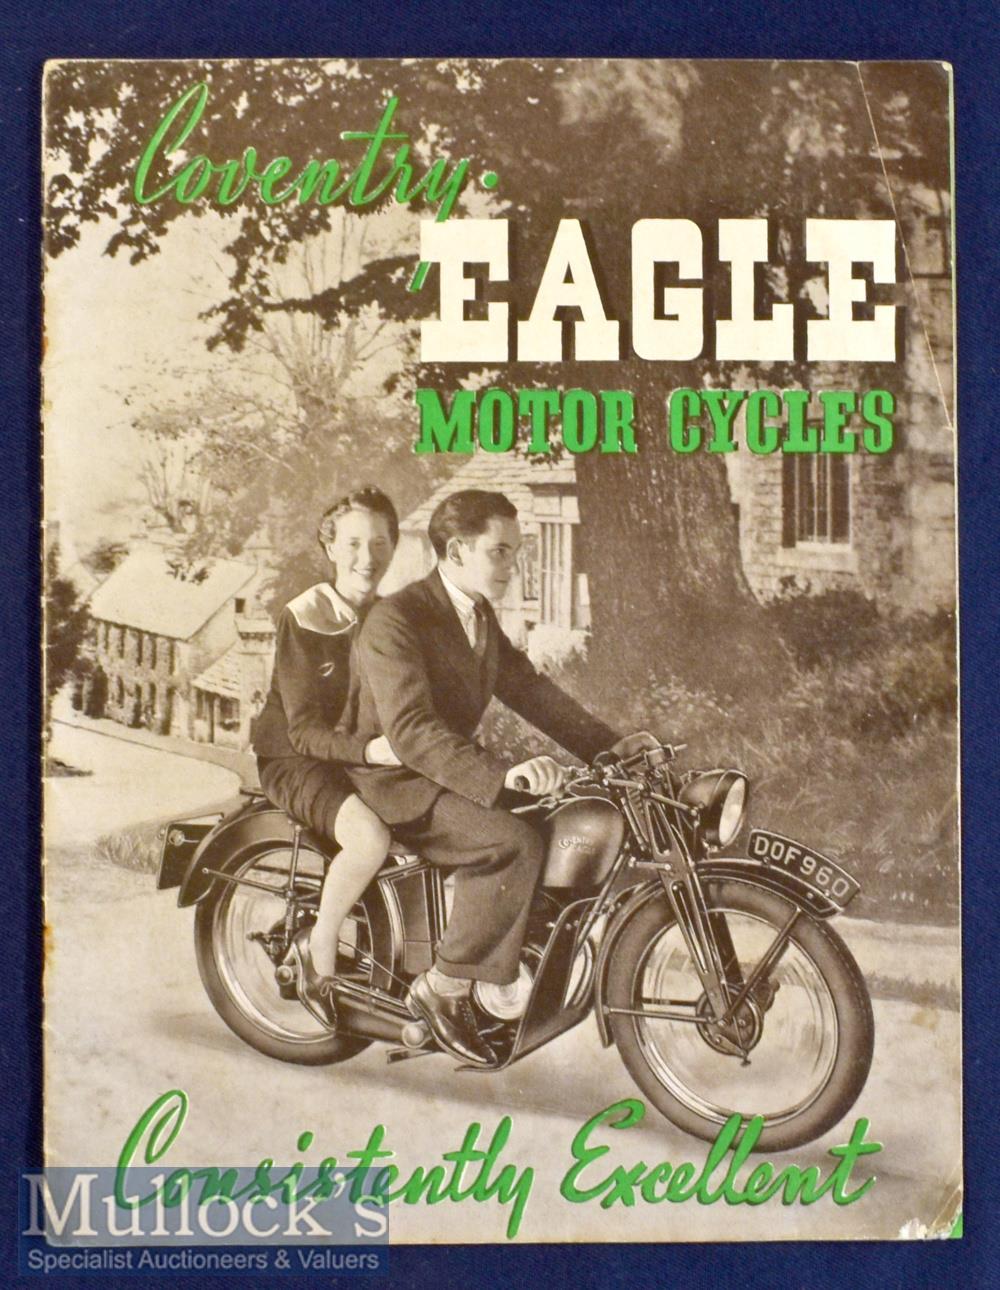 Coventry Eagle Motor Cycles 1939 Sales Catalogue A 16 page catalogue illustrating and detailing